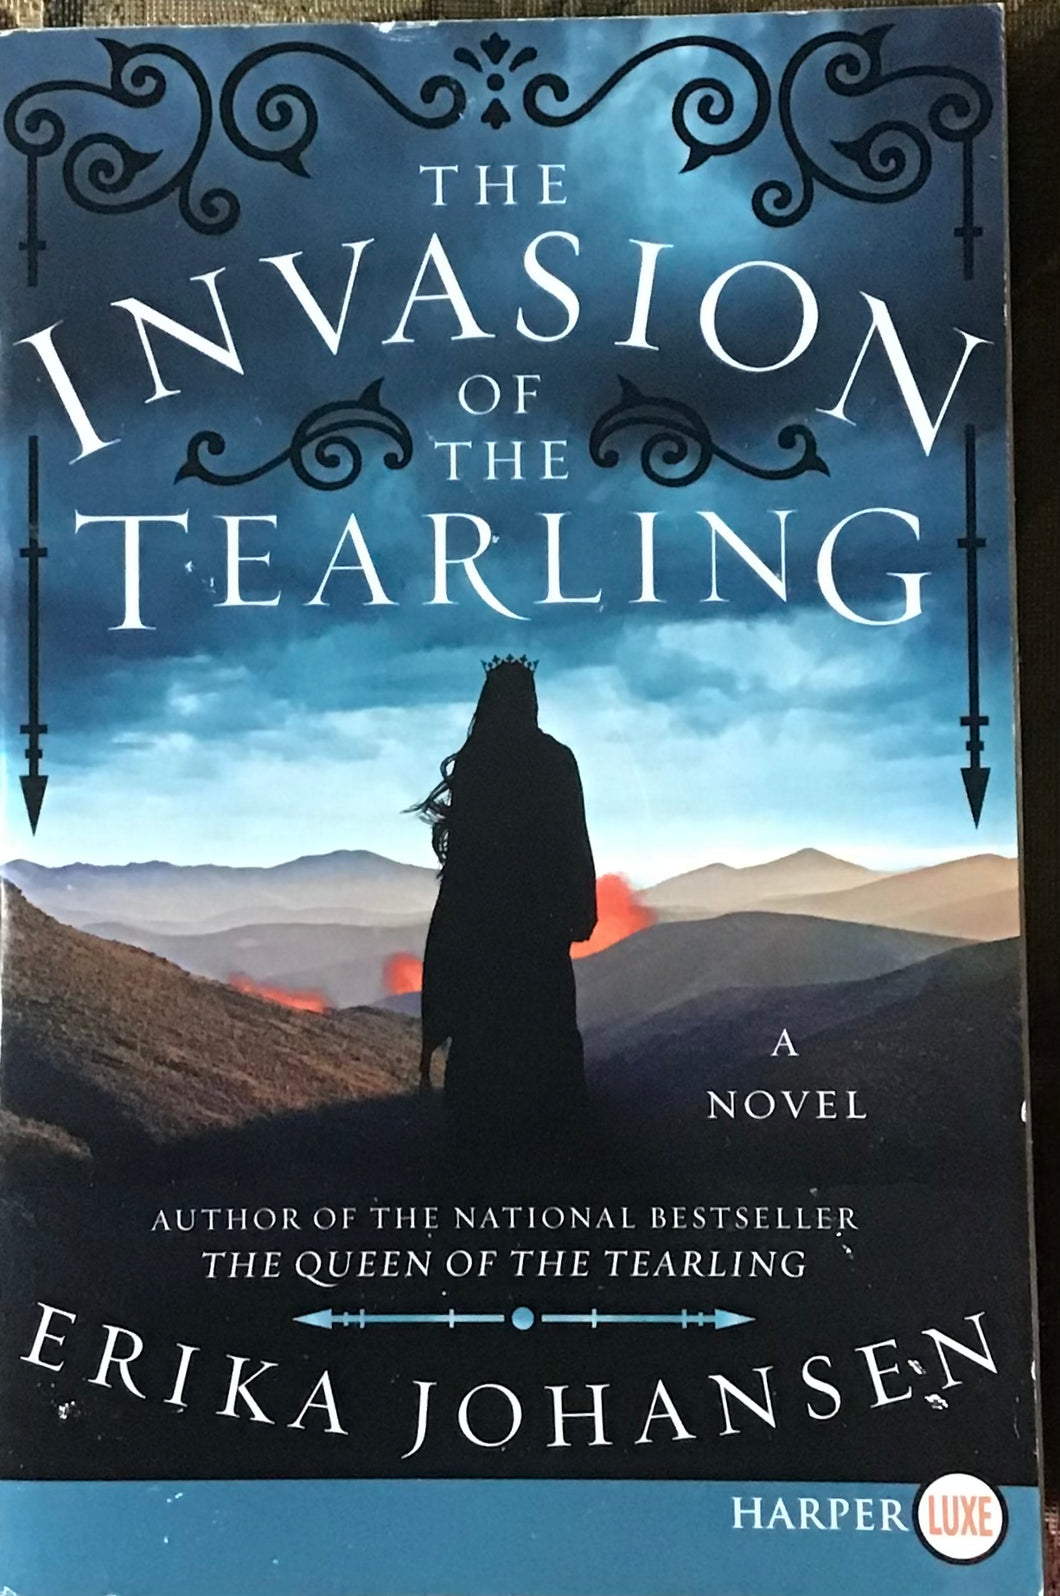 The Invasion of the Tearling, by Erika Johansen